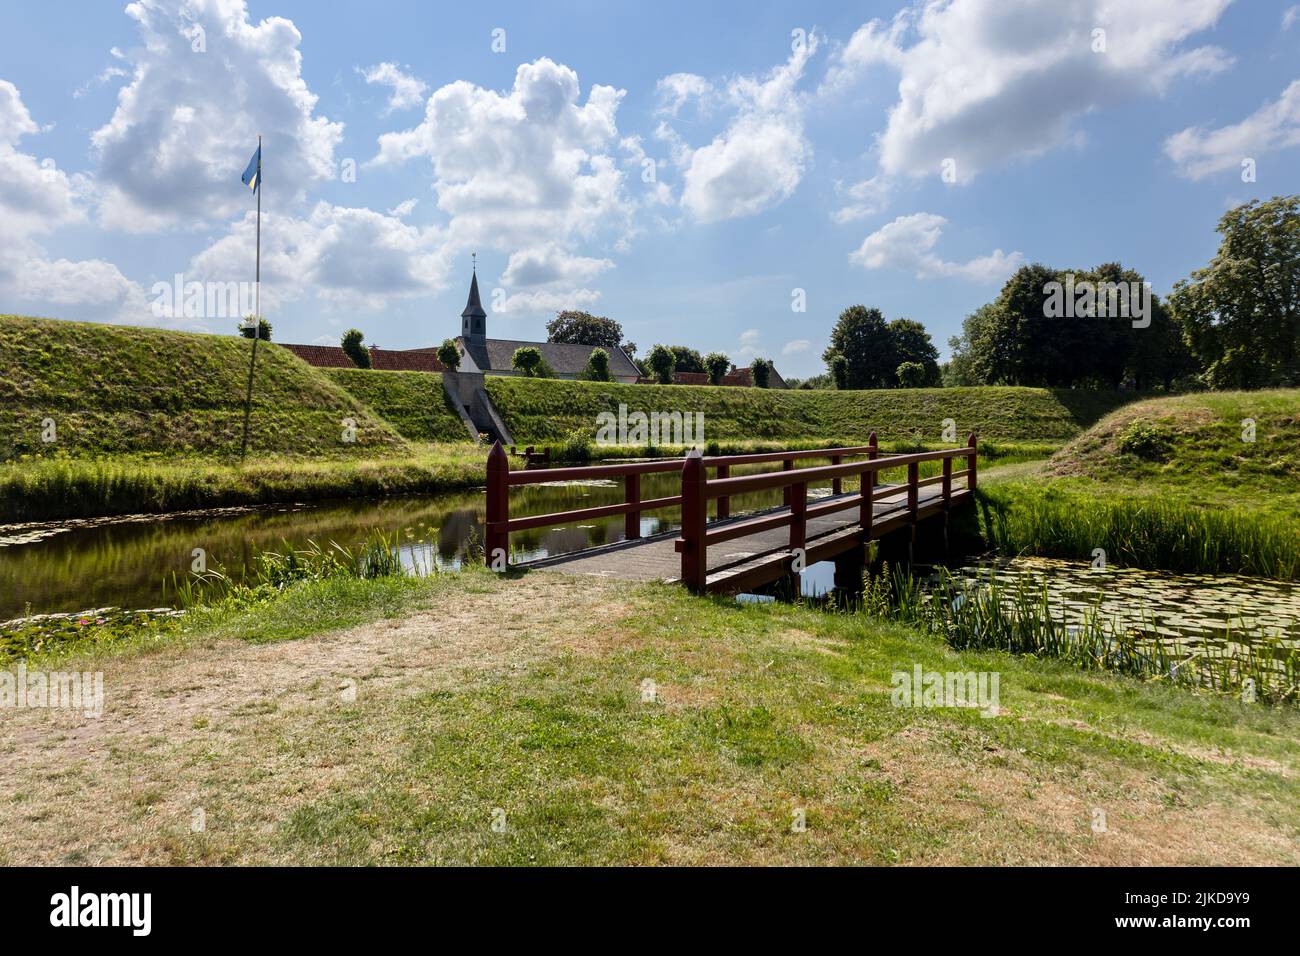 View of the outside of the village called Boertange, a fortified village made in the shape of a star, province of Groningen, the Netherlands Stock Photo